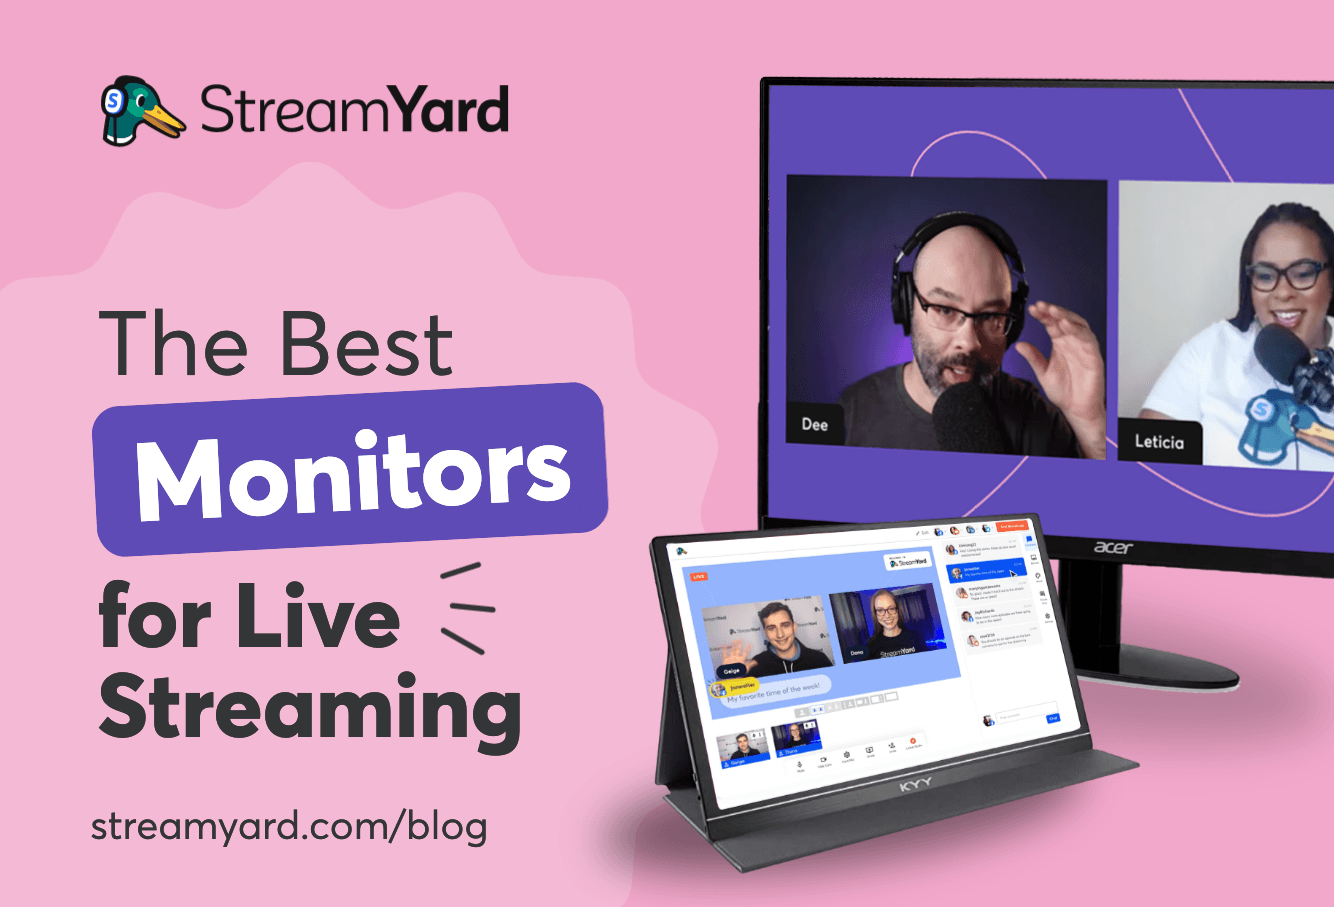 Find the best monitors for live streaming. Also, learn how to pick a live streaming monitor to elevate your live streaming production quality.